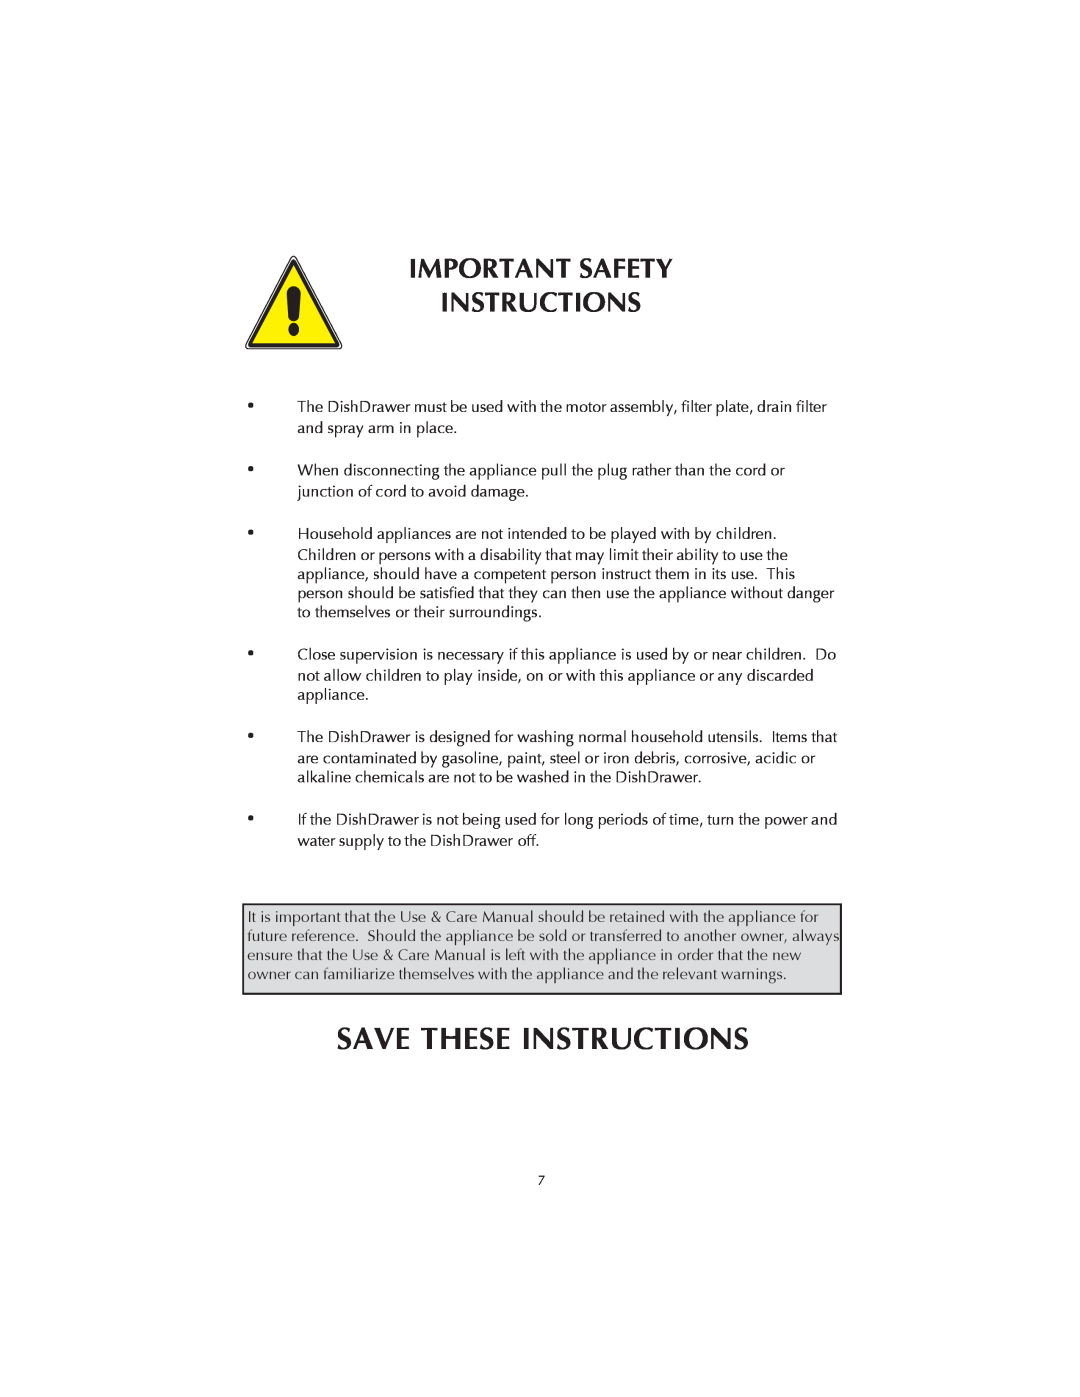 Fisher & Paykel DS602 manual Save These Instructions, Important Safety Instructions 